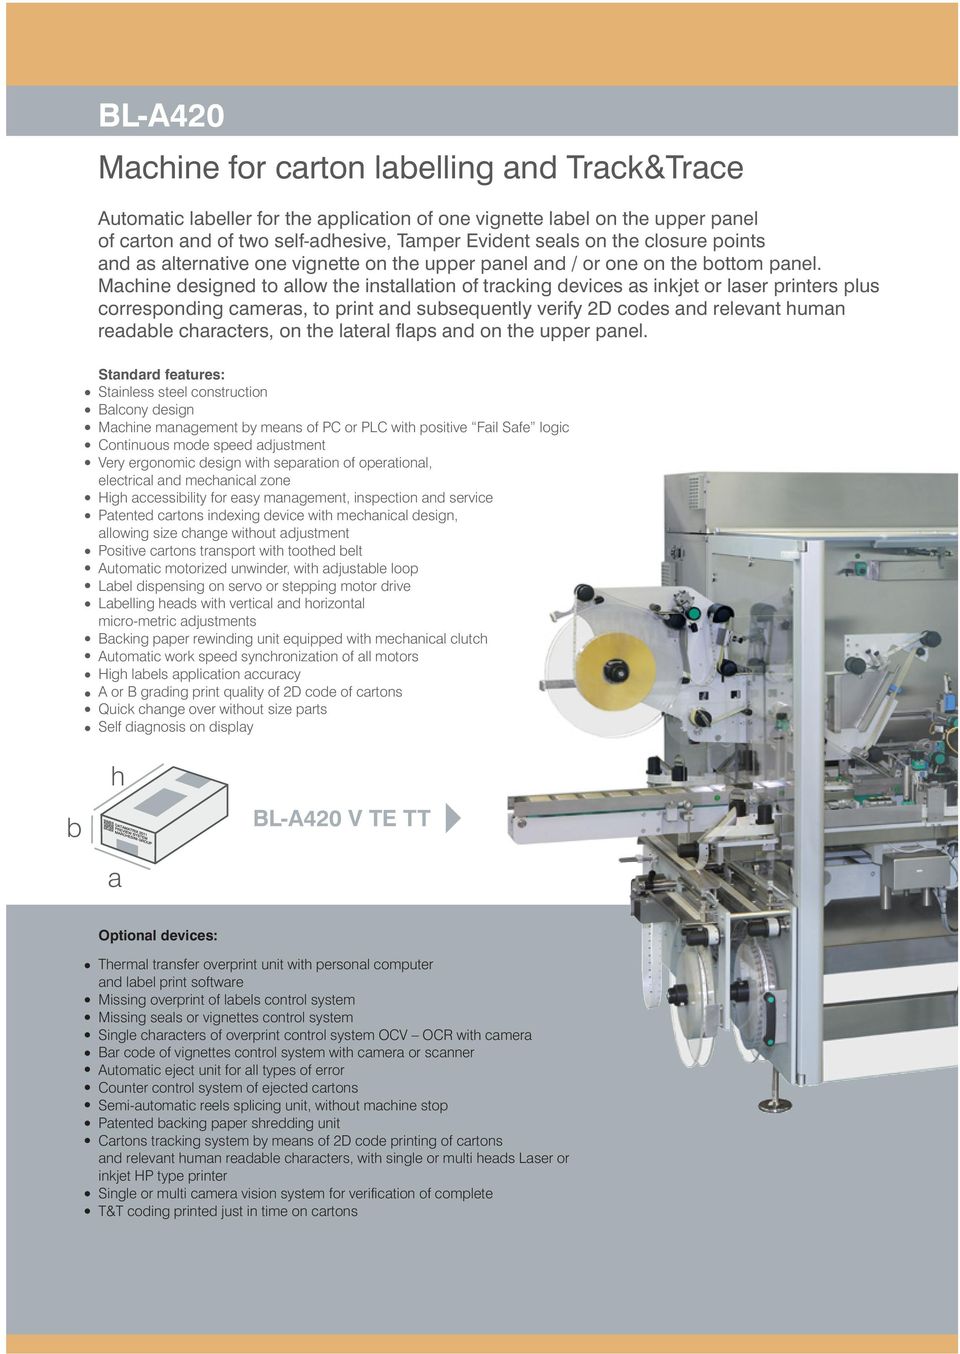 Machine designed to allow the installation of tracking devices as inkjet or laser printers plus corresponding cameras, to print and subsequently verify 2D codes and relevant human readable